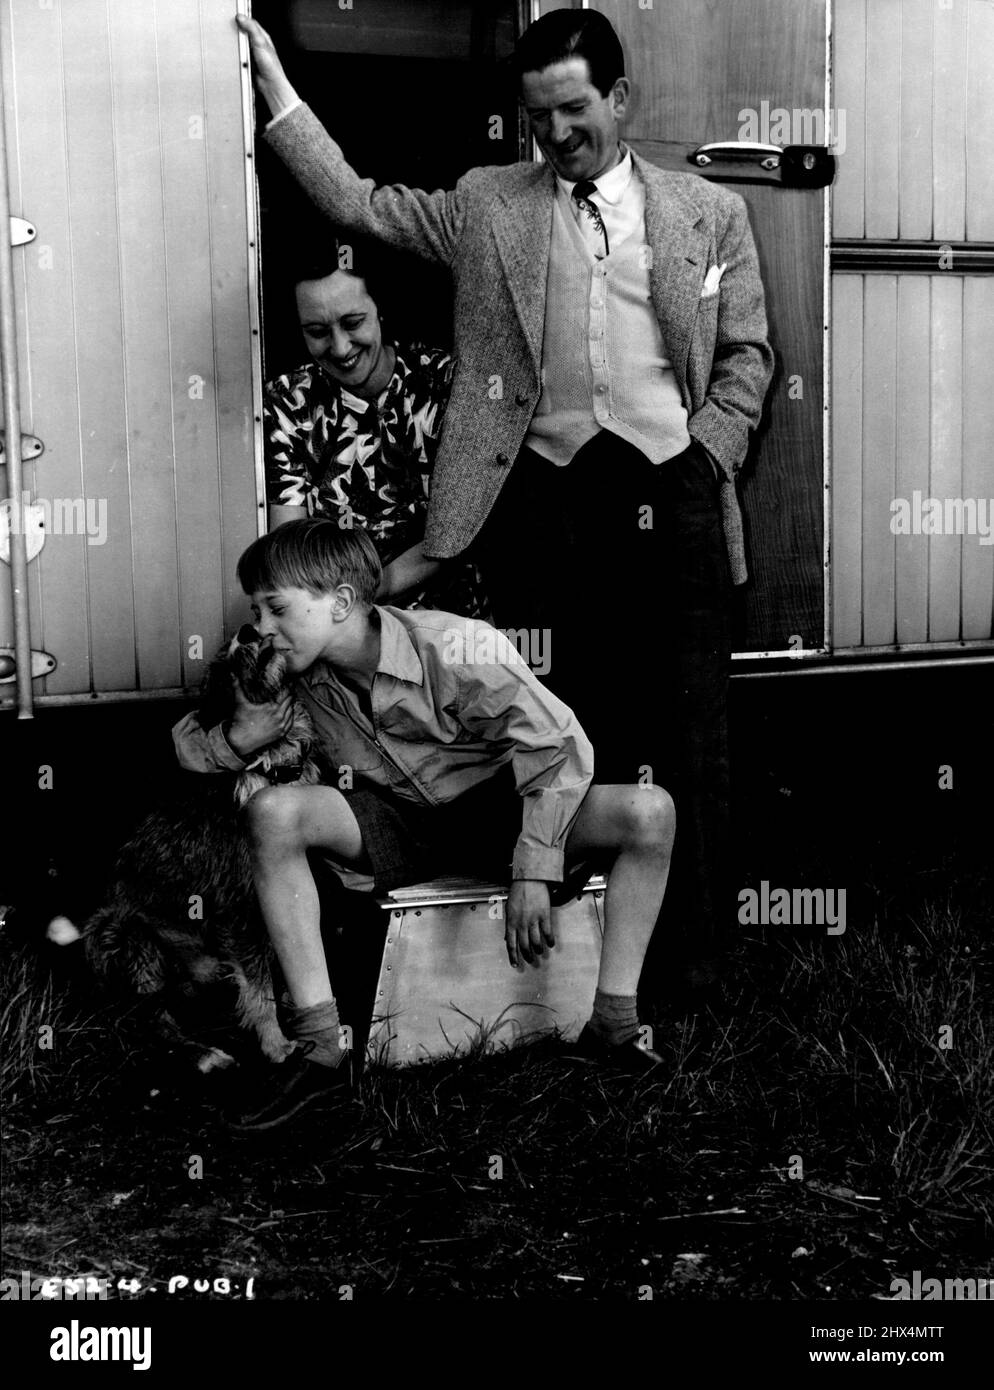 Thirteen-year-old Andrew Ray who stars with Kenneth More and Kathleen Ryan in the Associated British-Marble Arch Production 'The Yellow Balloon' with his mother and famous comedian father Ted Ray - hot forgetting Rusty - outside the family caravan which was brought to Elstree Studios for the length of the production. In the caravan Mrs. Ray Cooked her son's meals and a tutor supervised his lessons. 'The Yellow Balloon' was produced by Victor Skutezky and directed by J. Lee Thompson. September 30, 1952. Stock Photo